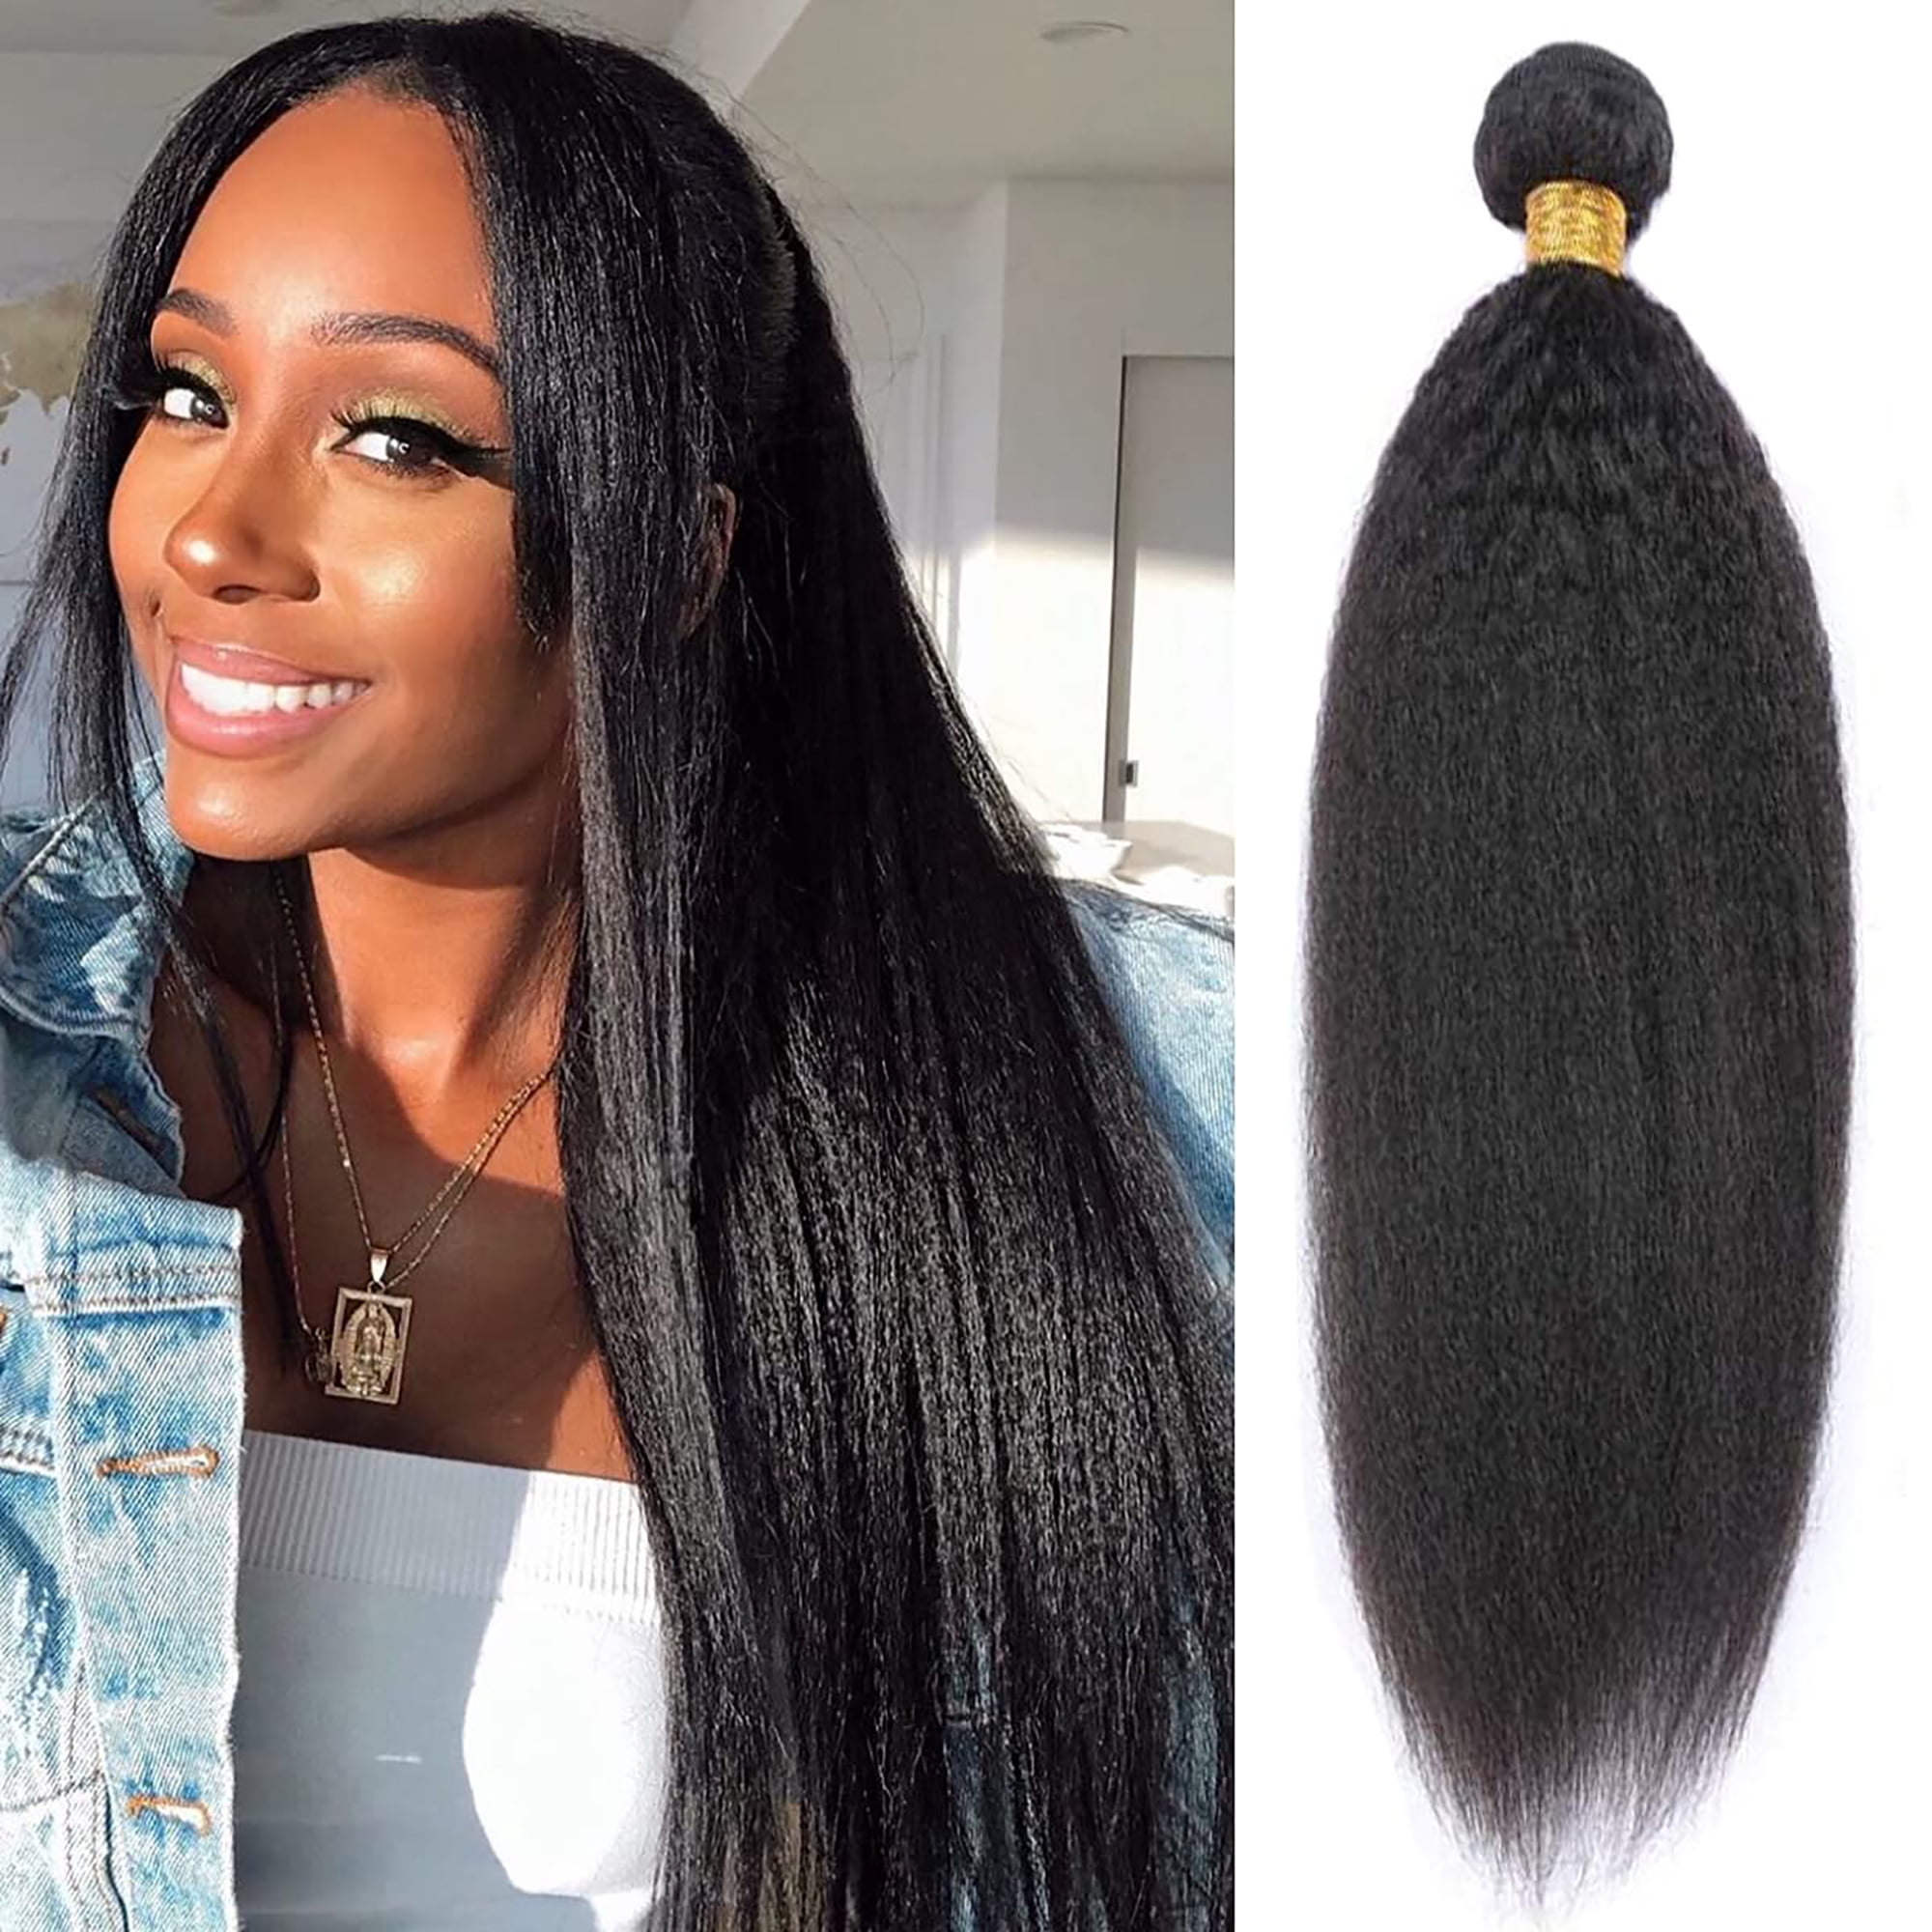 Full Shine Human Hair Weft 18 inch Sew in Weave Hair Extensions 1 Bundle  Off Black Kinky Straight Bundles 100g 